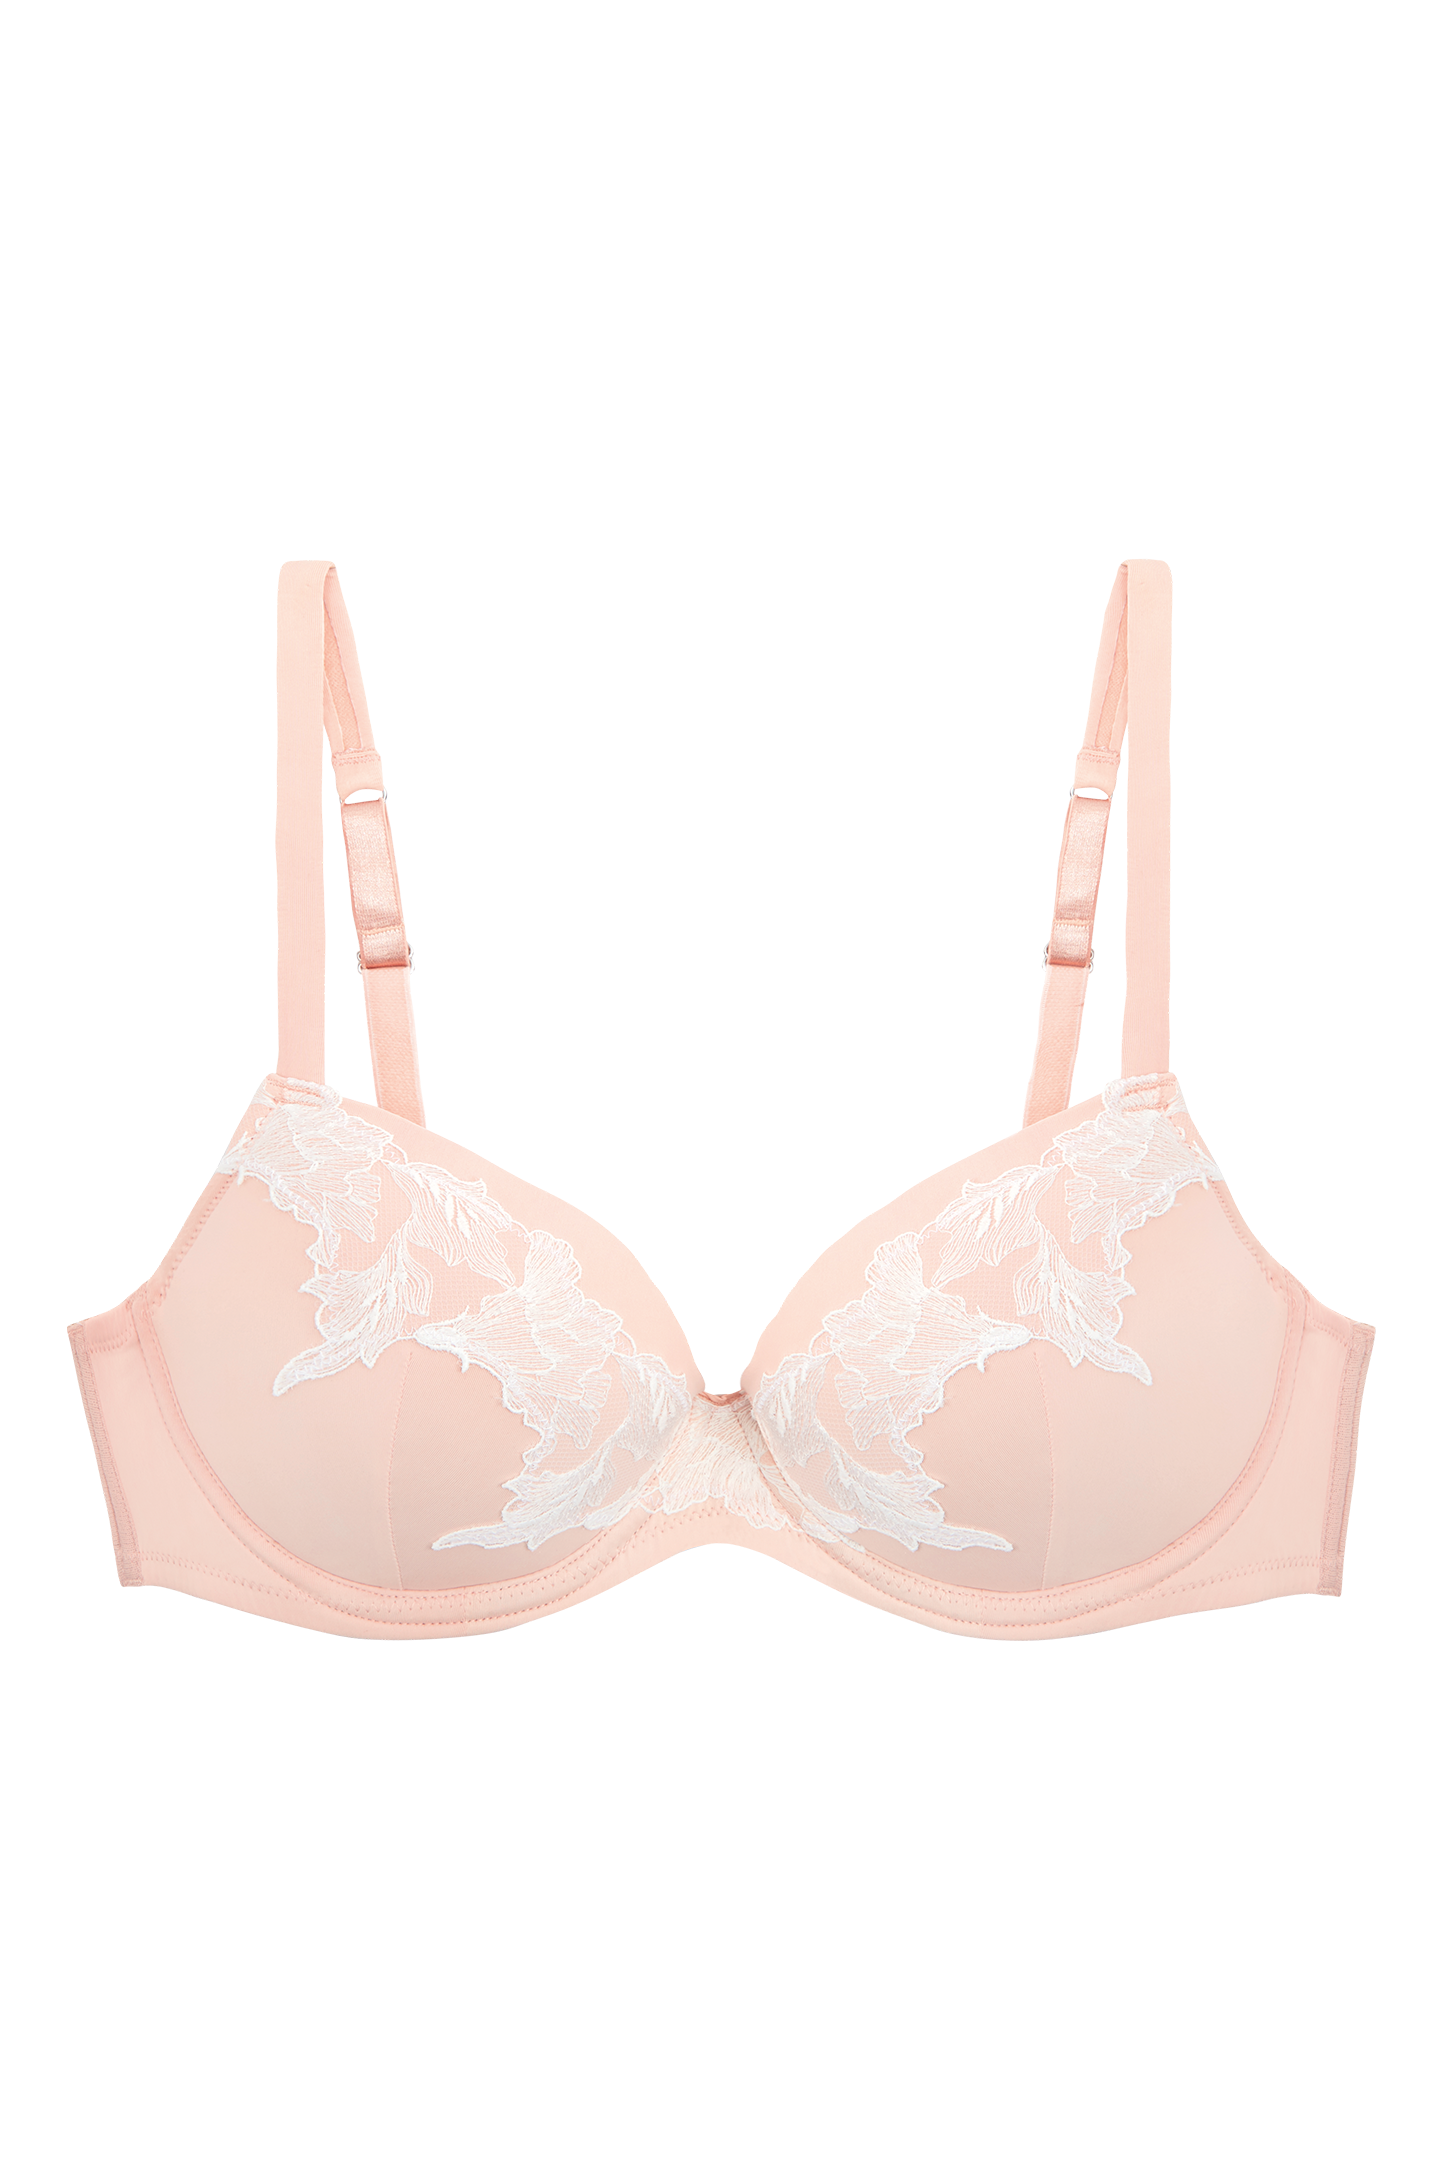 Buy LOVERS DREAM PUSH UP BRA online at Intimo